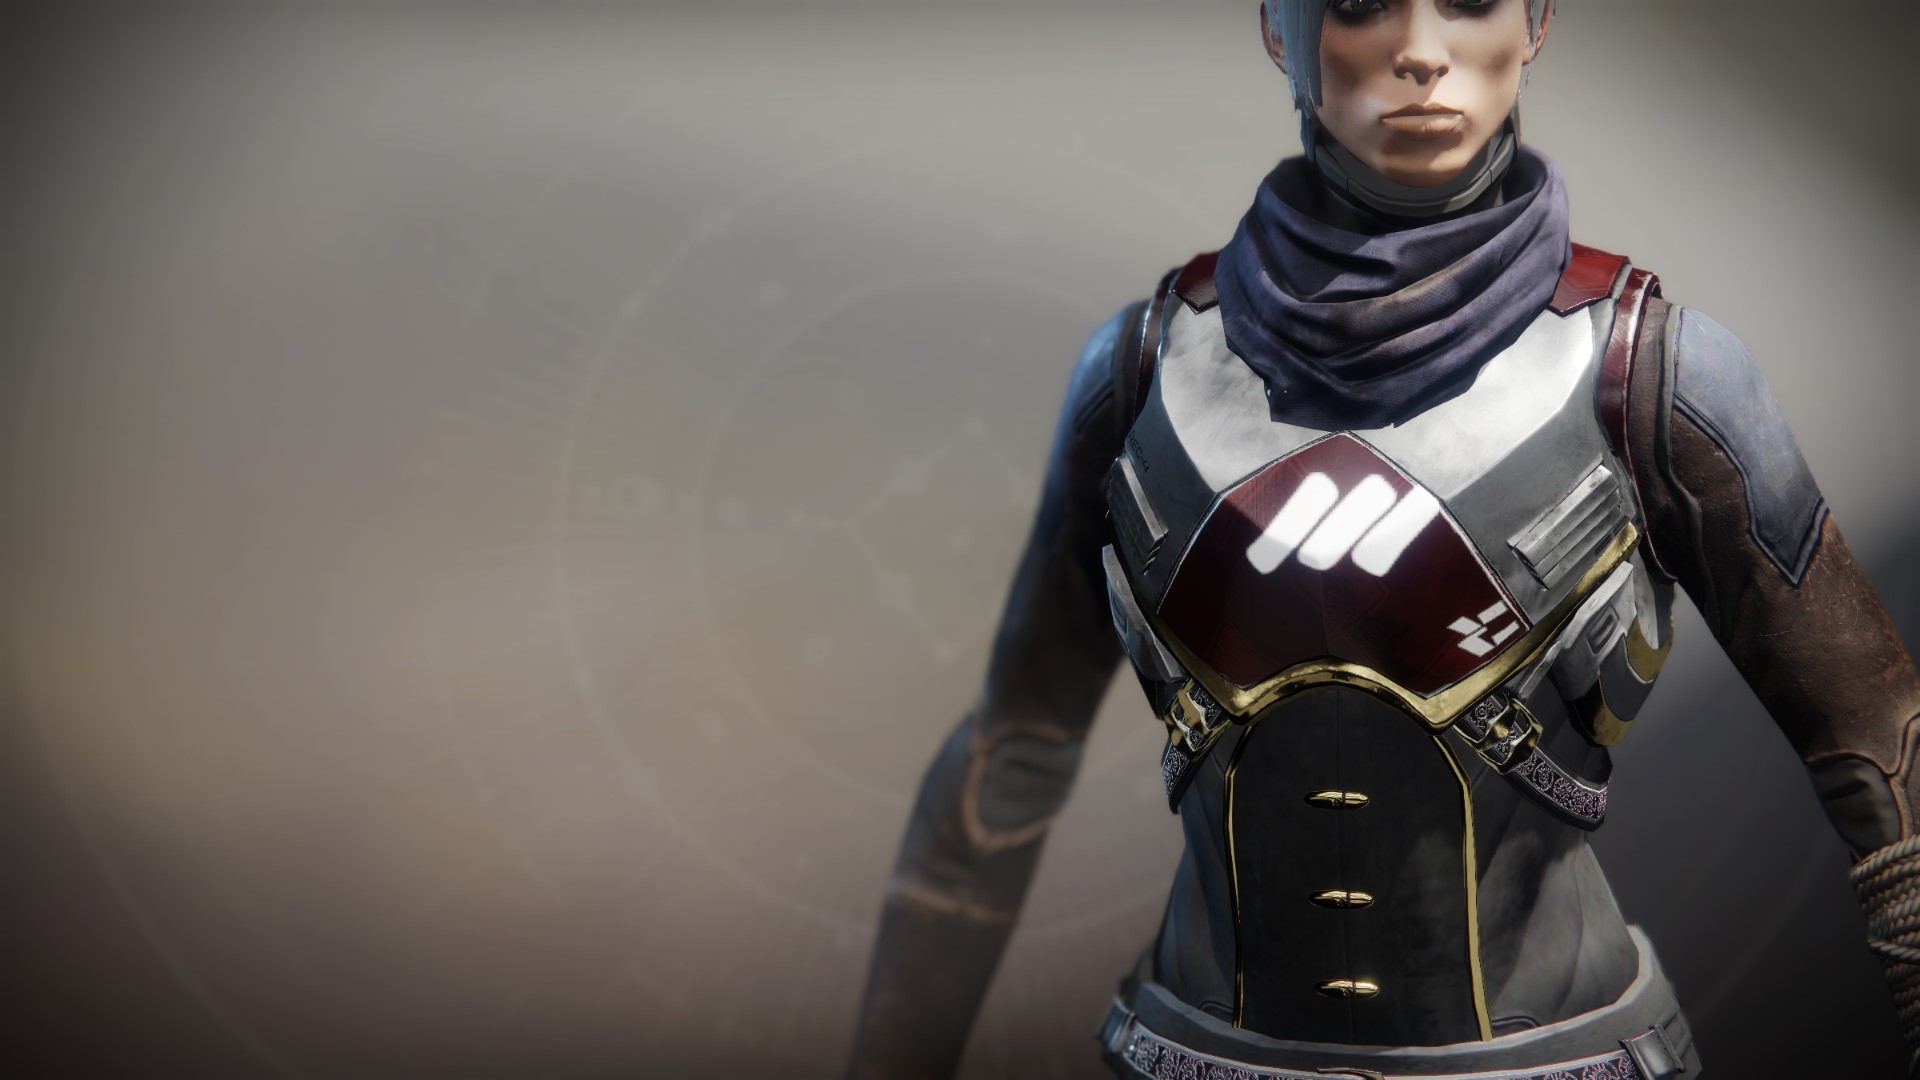 An in-game render of the Sovereign Vest.